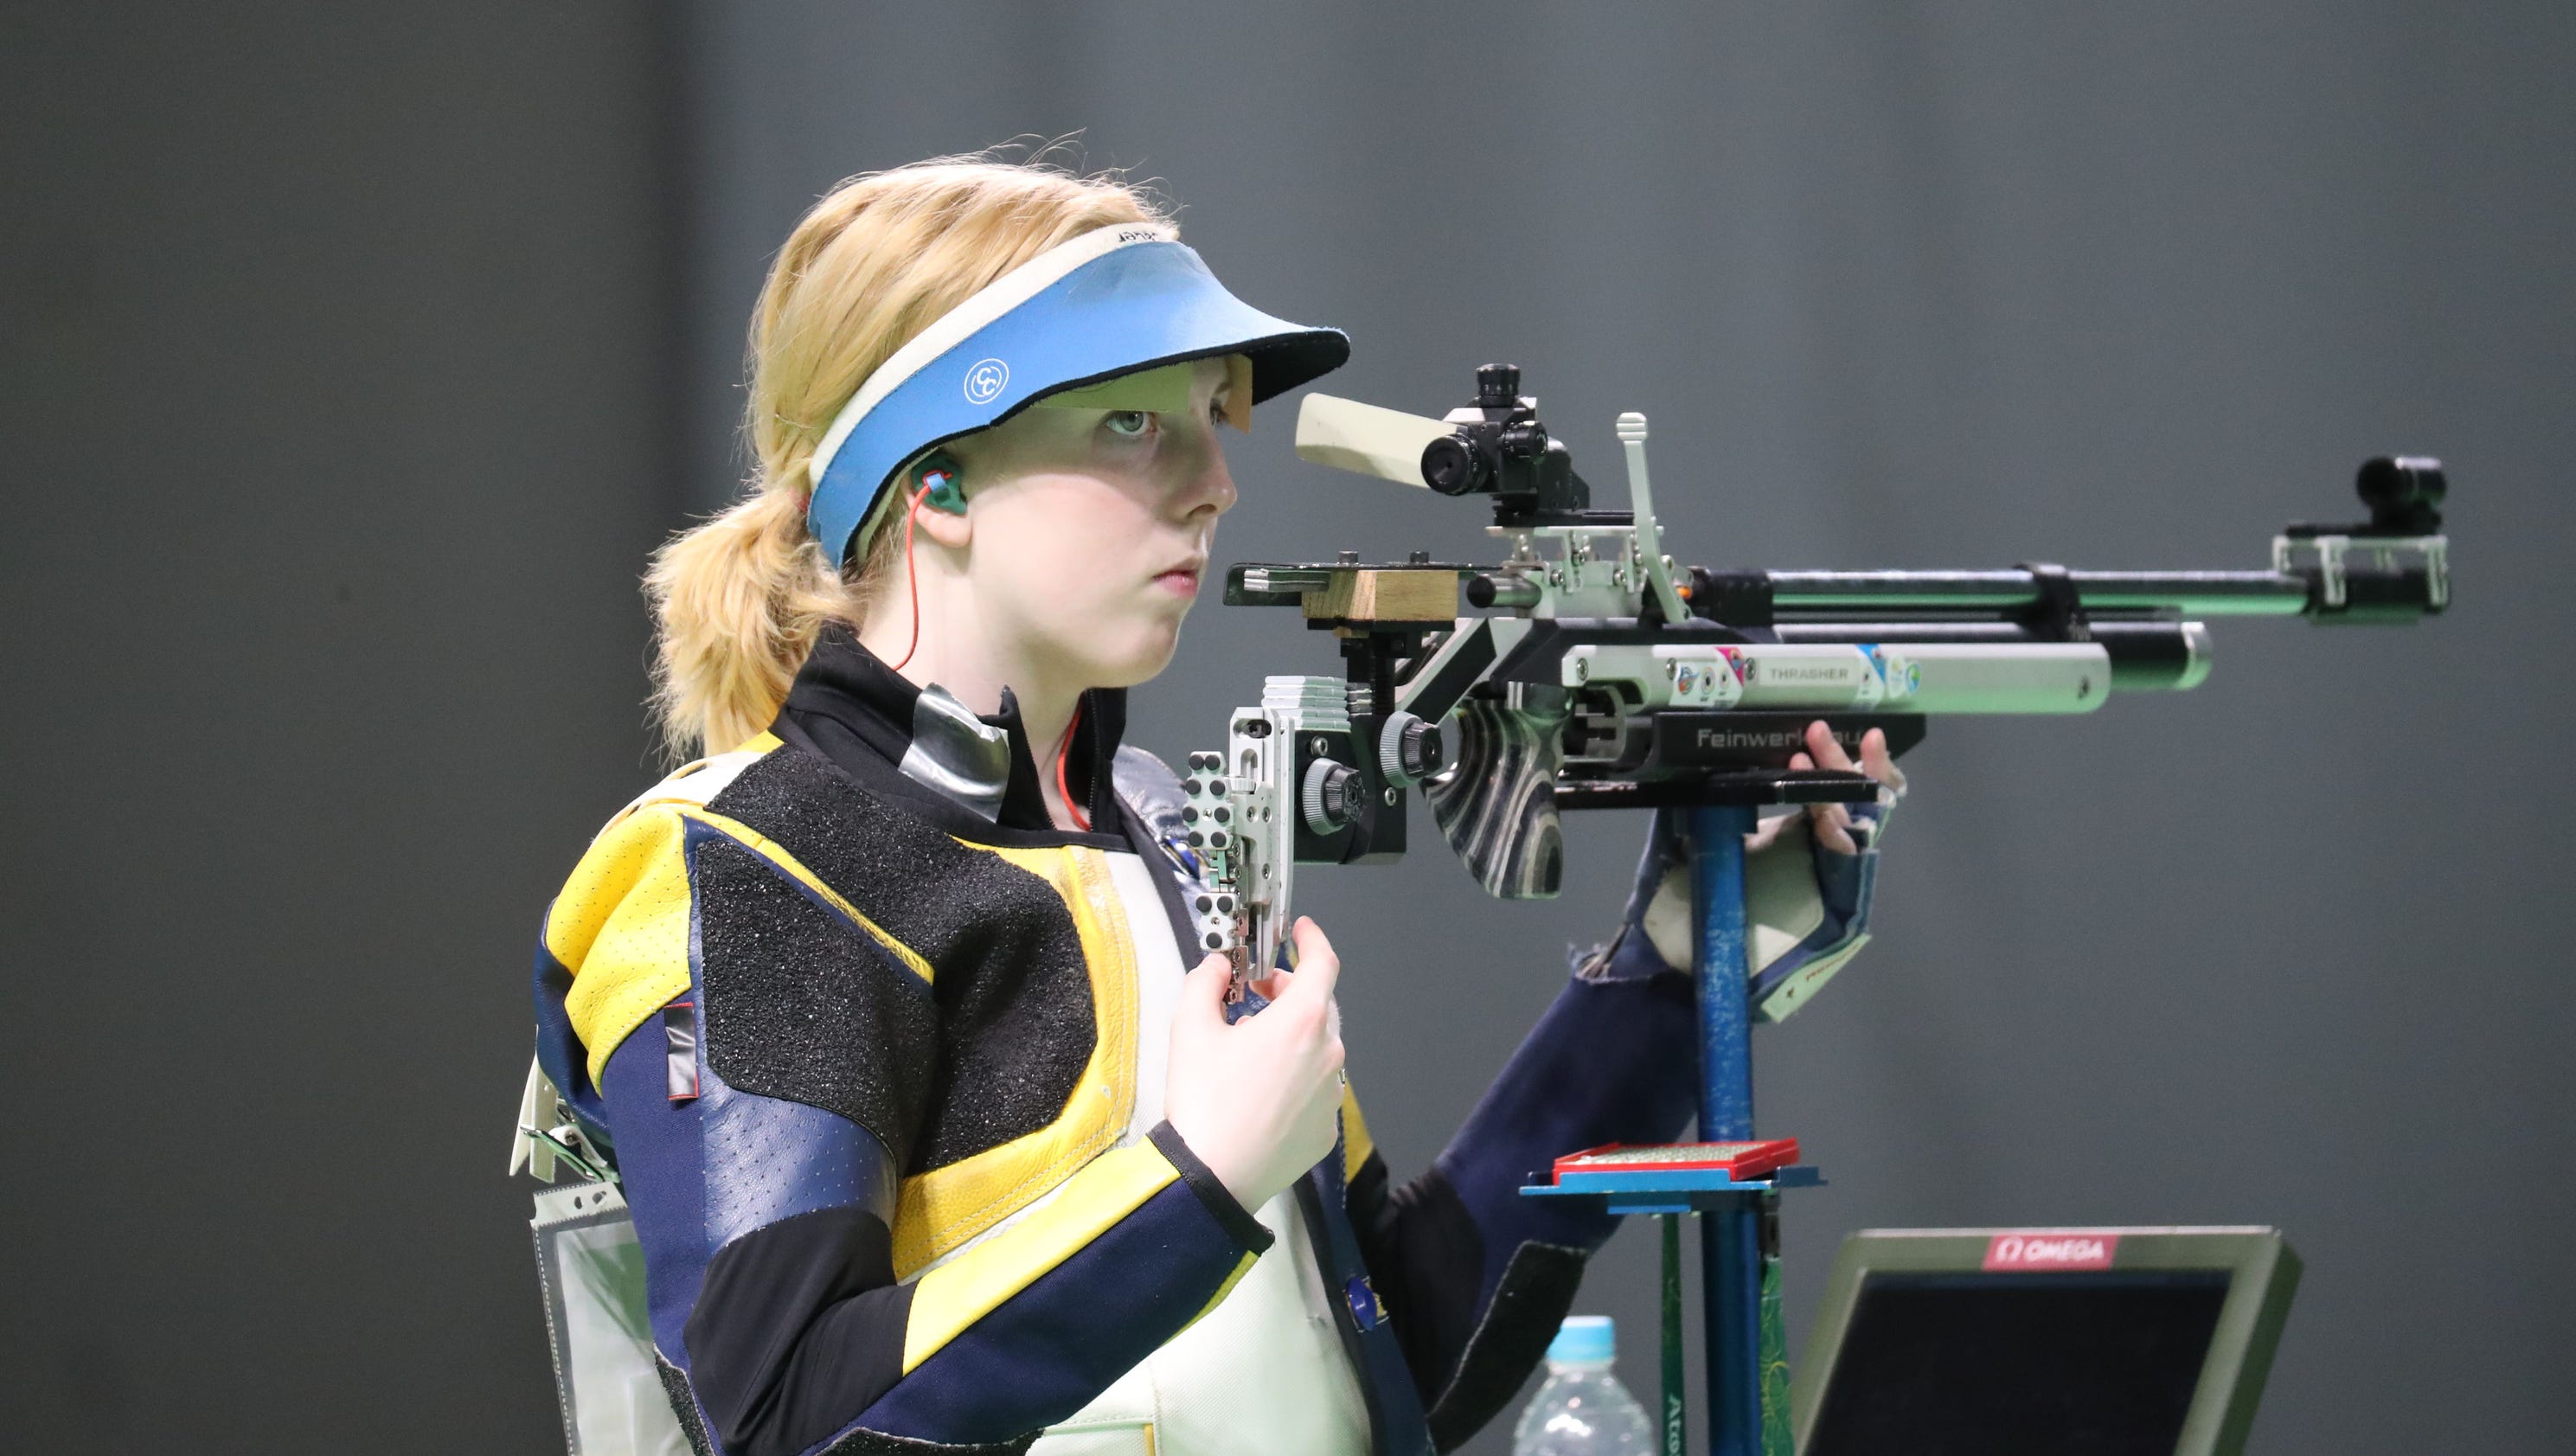 Shooting gold medalist Ginny Thrasher laments controversy over gun laws